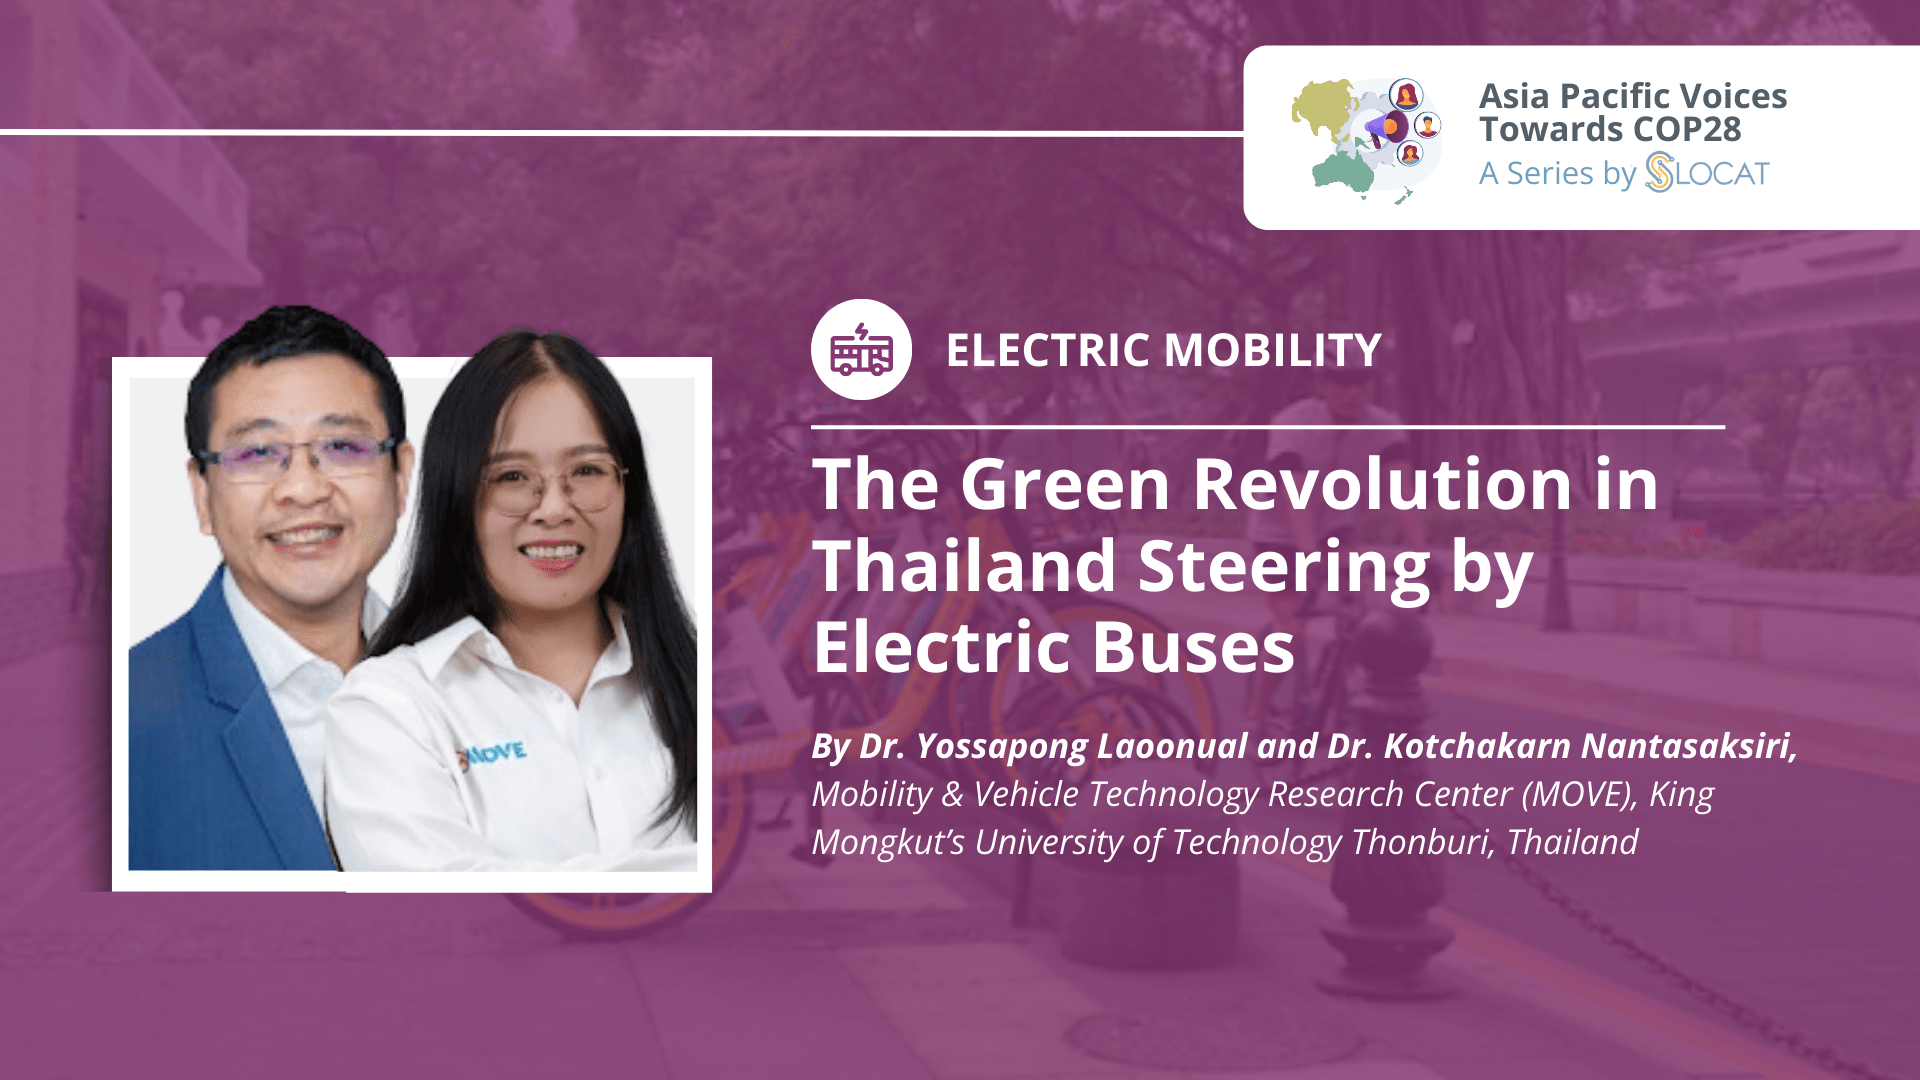 The Green Revolution in Thailand Steering by Electric Buses